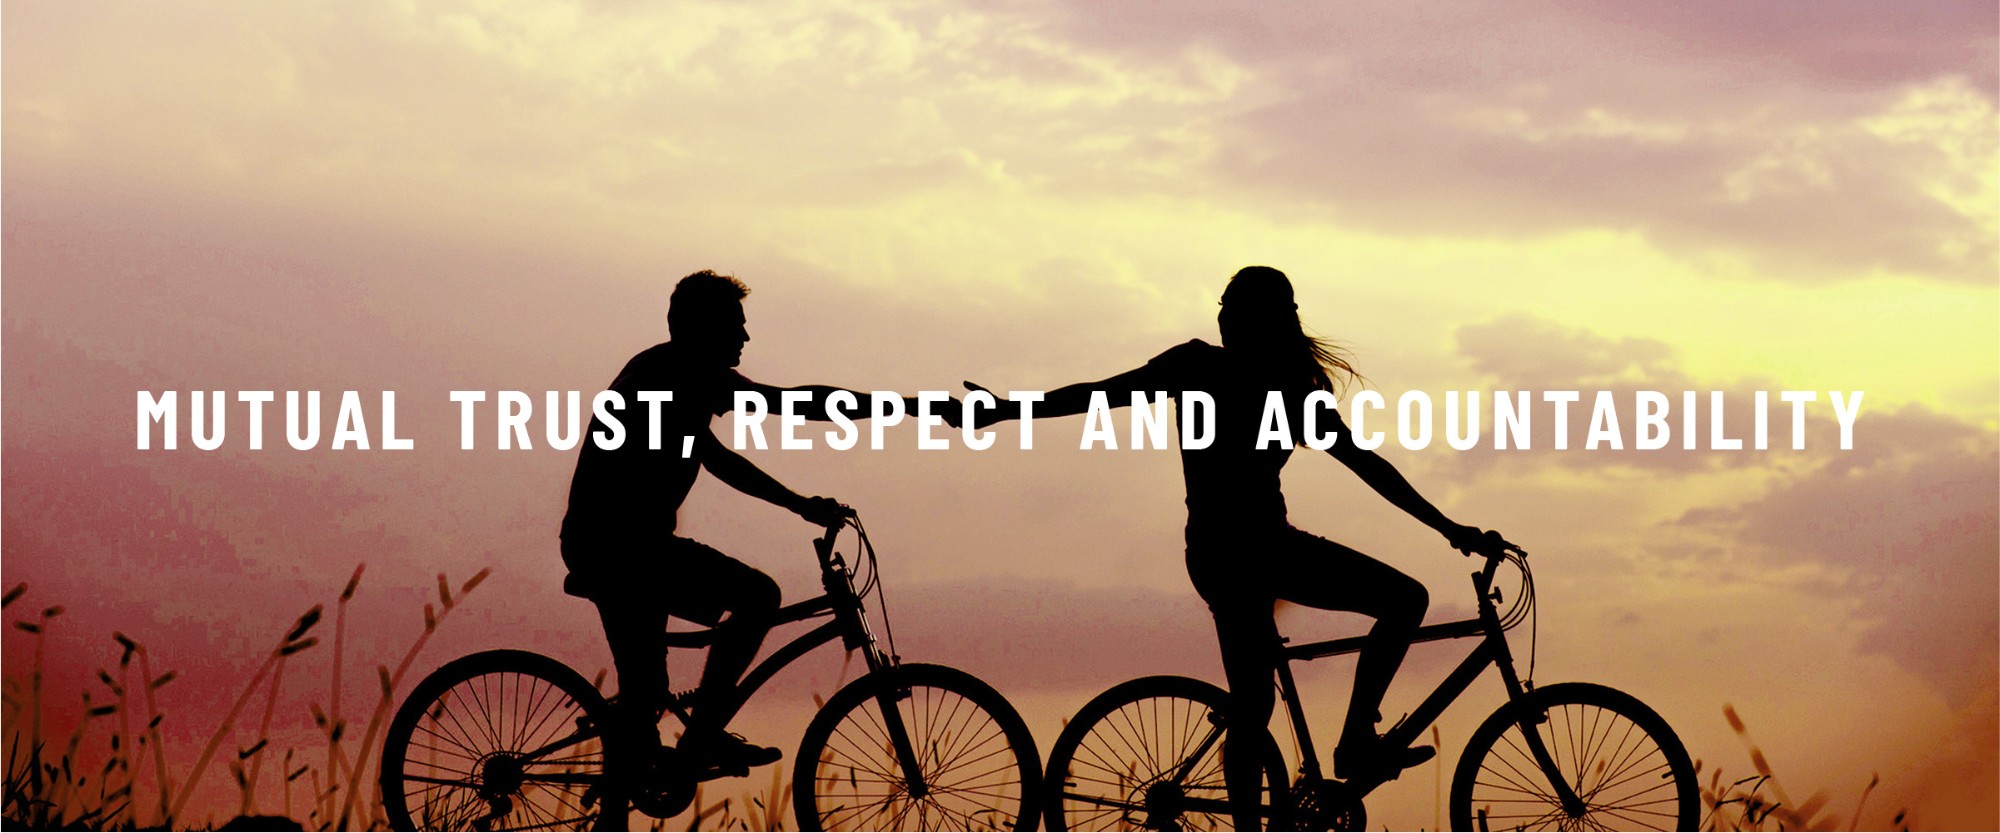 Image: Two people riding bikes holding hands Text: Mutual trust, respect and accountability